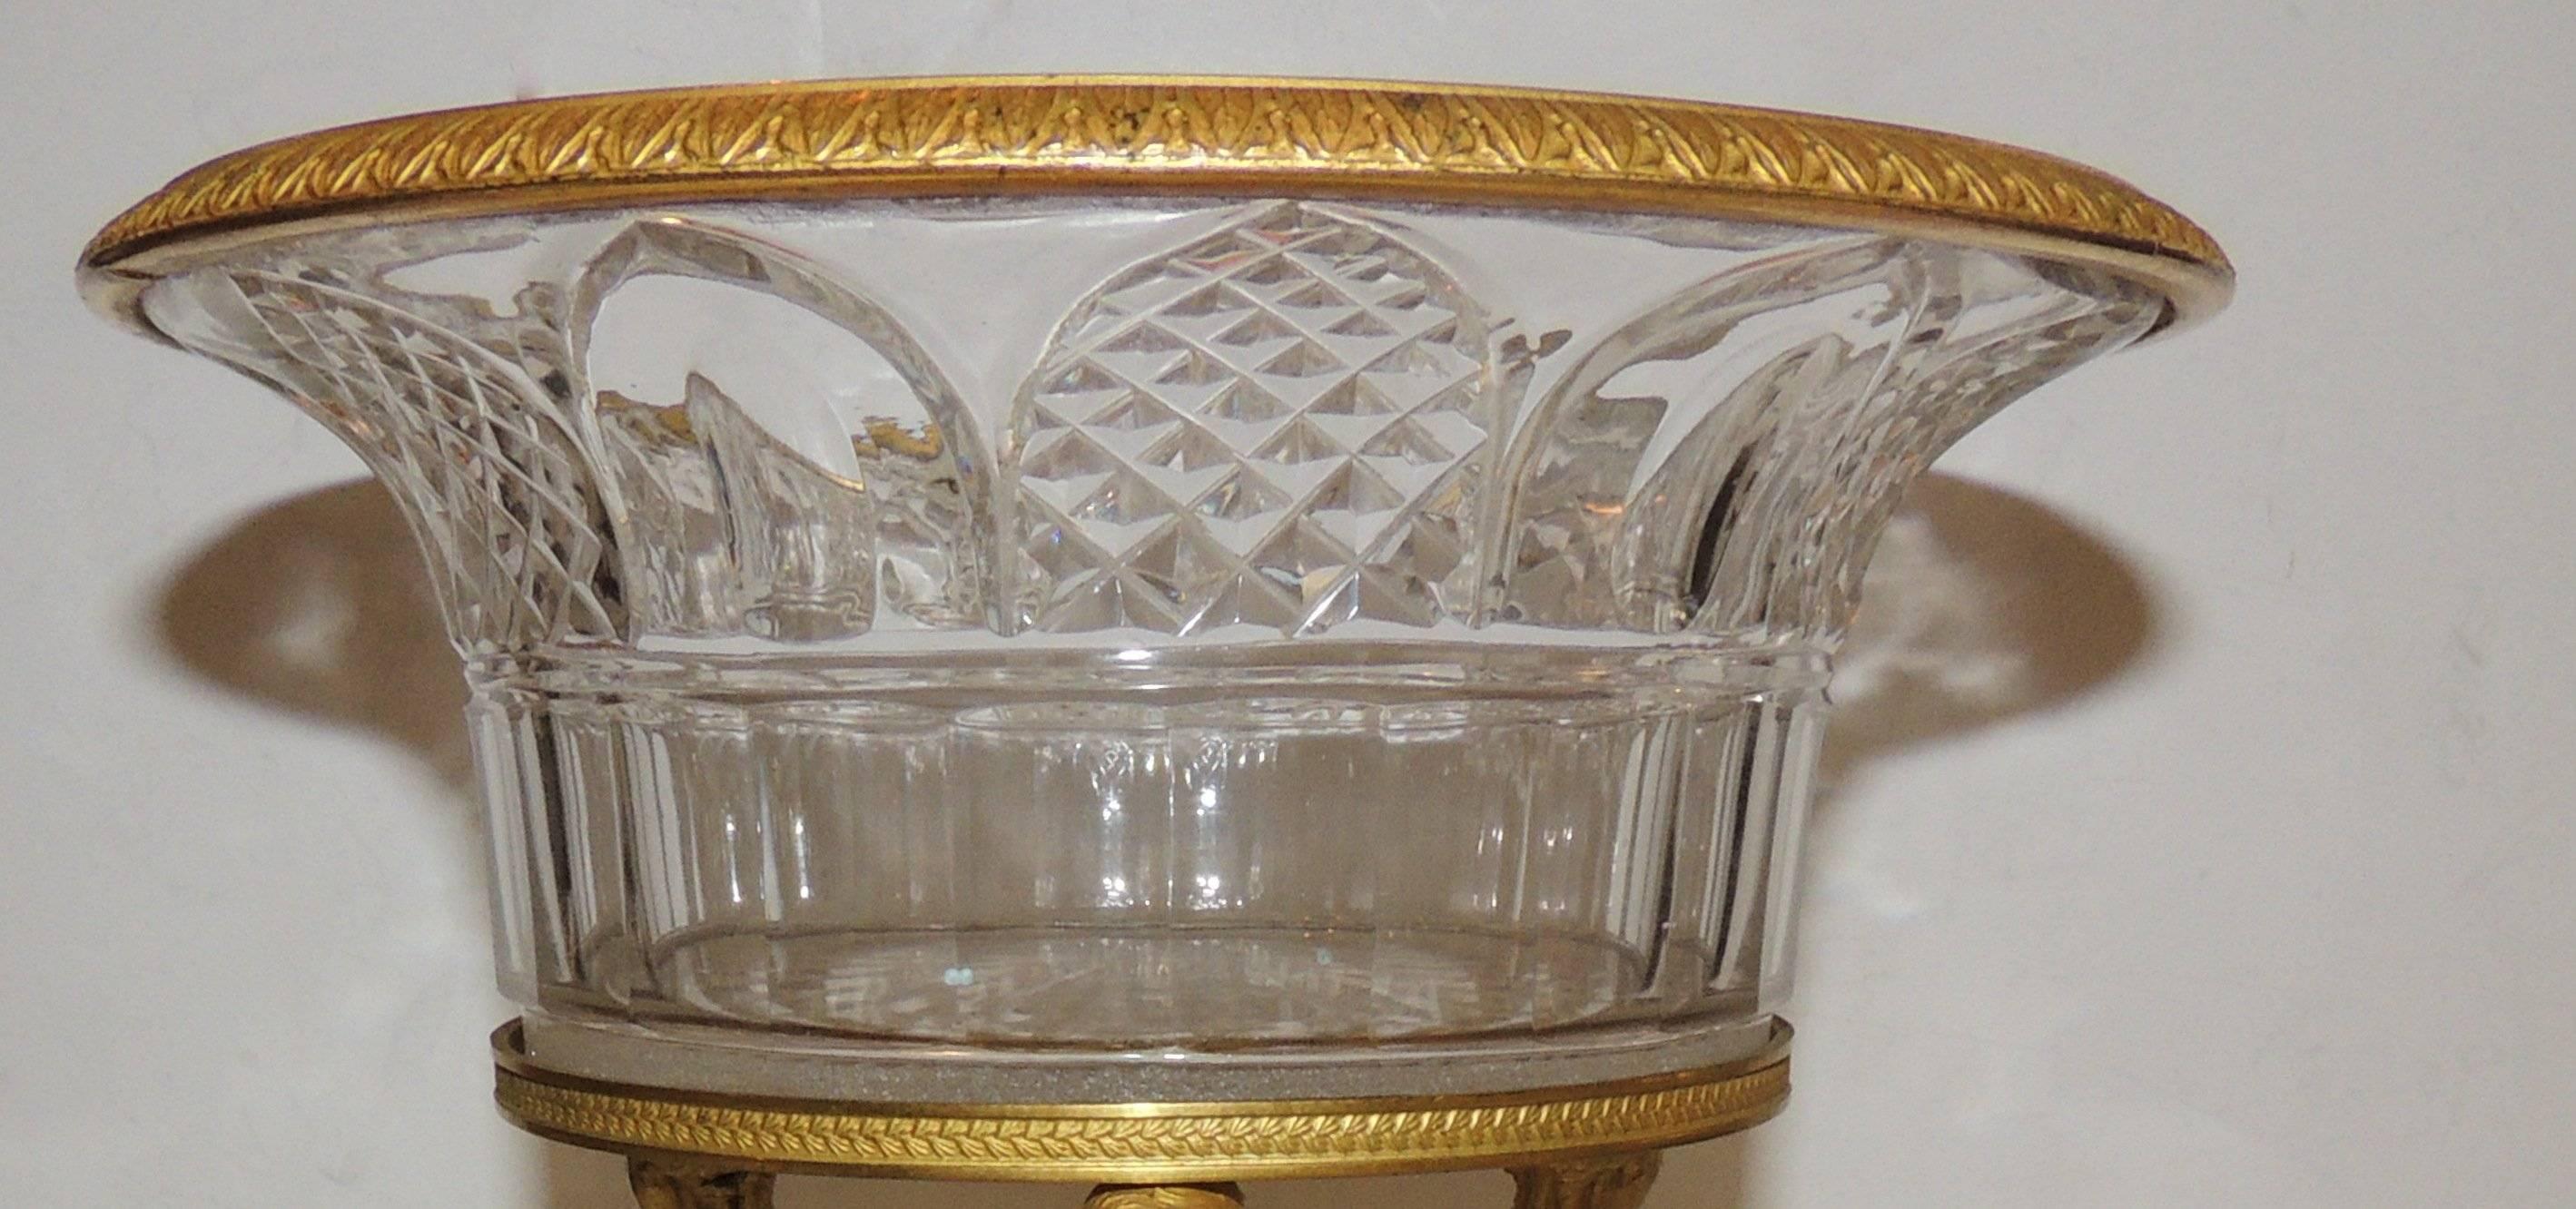 Wonderful French Empire Dore Bronze Cut Crystal Figural Neoclassical Centrepiece For Sale 1